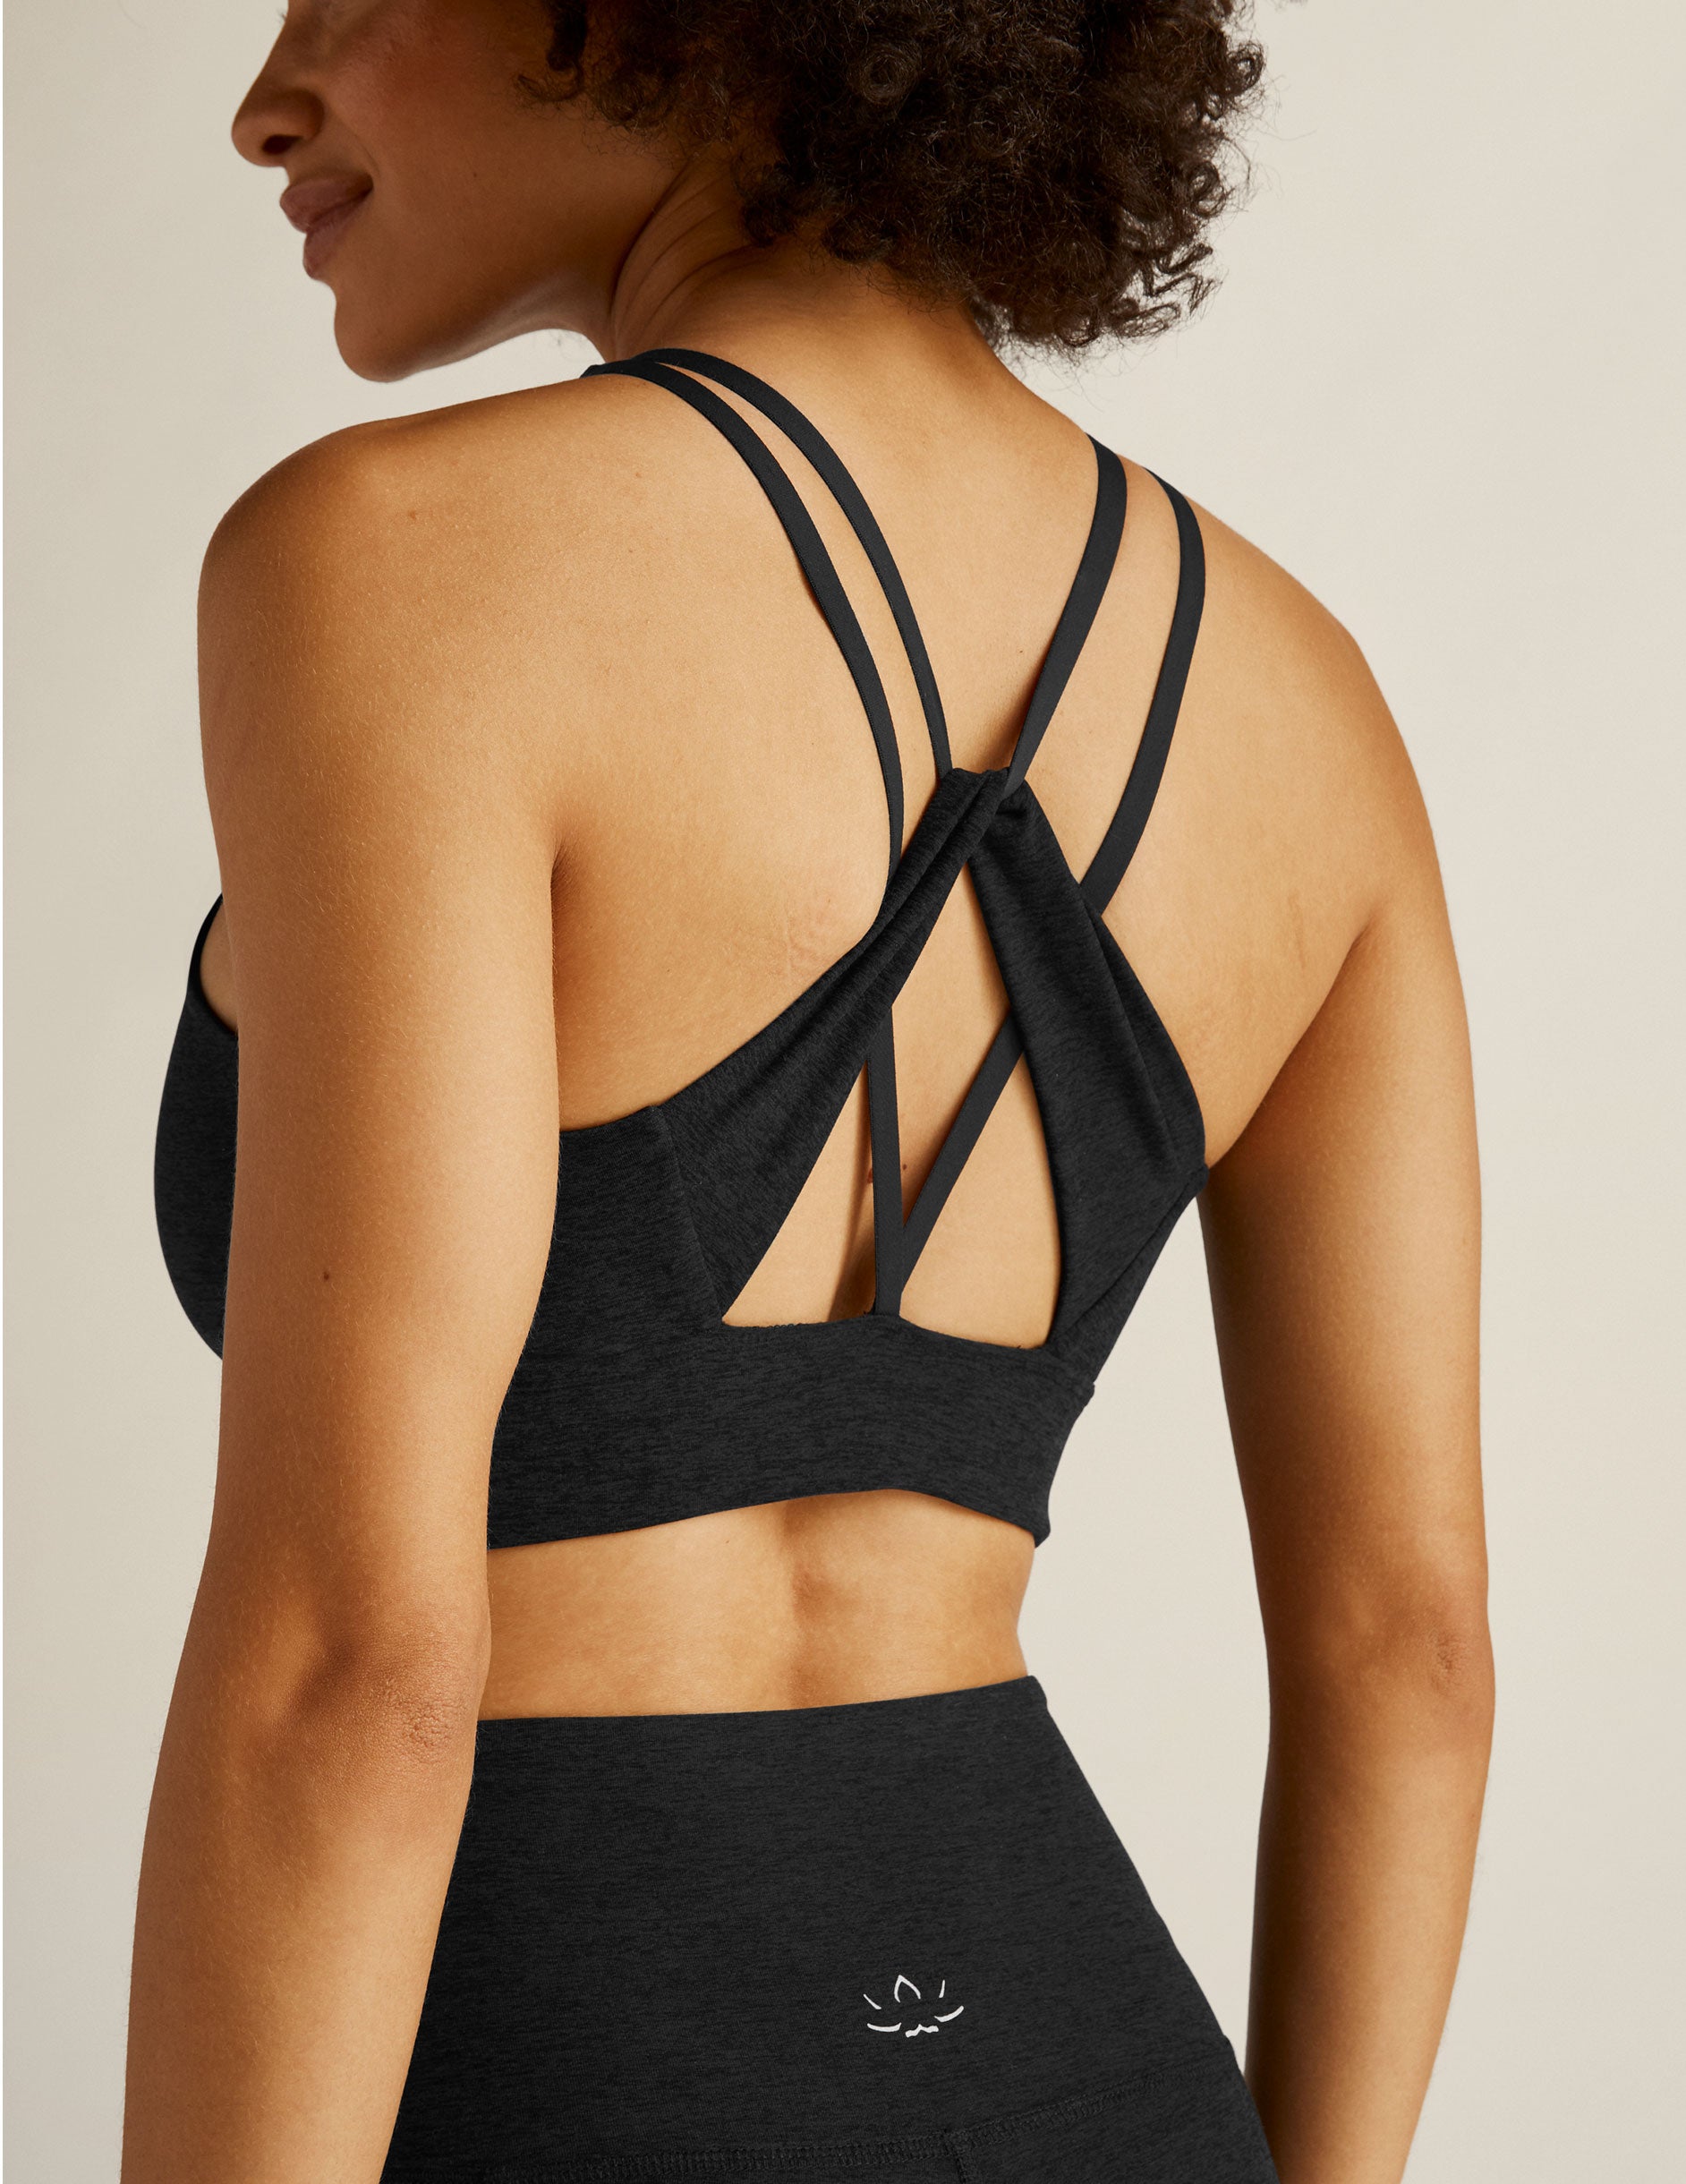 black bra top with an open back, strap detail.